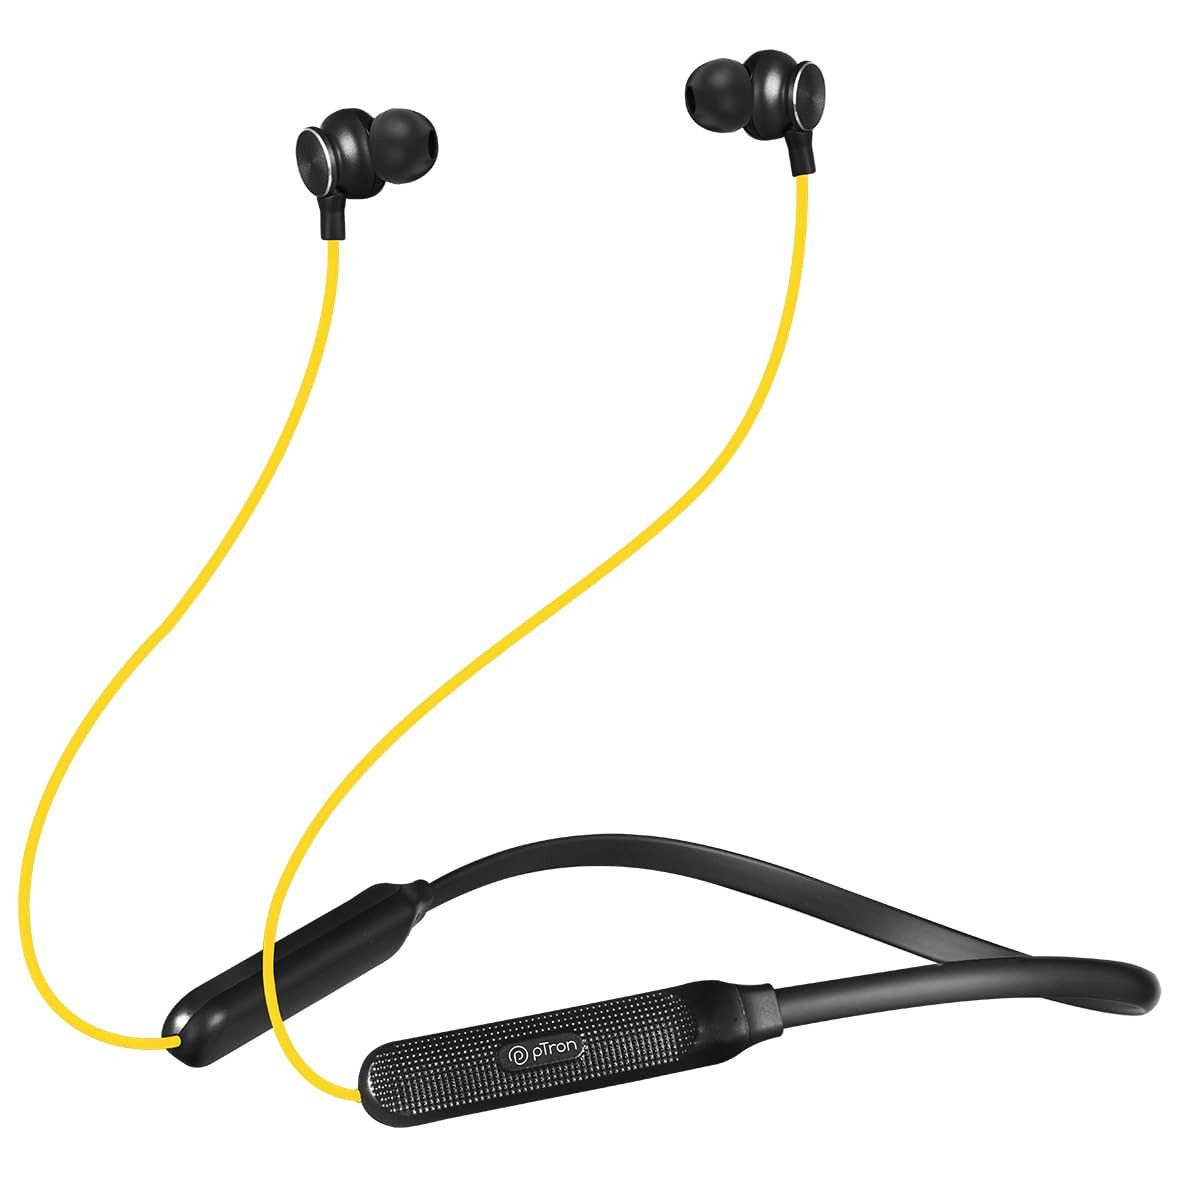 pTron Tangent Duo Bluetooth 52 Wireless in-Ear Headphones 13mm Driver Deep Bass HD Calls Fast Charging Type-C Wireless Neckband Dual Pairing Voice Assistant IPX4 Water Resistant YellowBlack